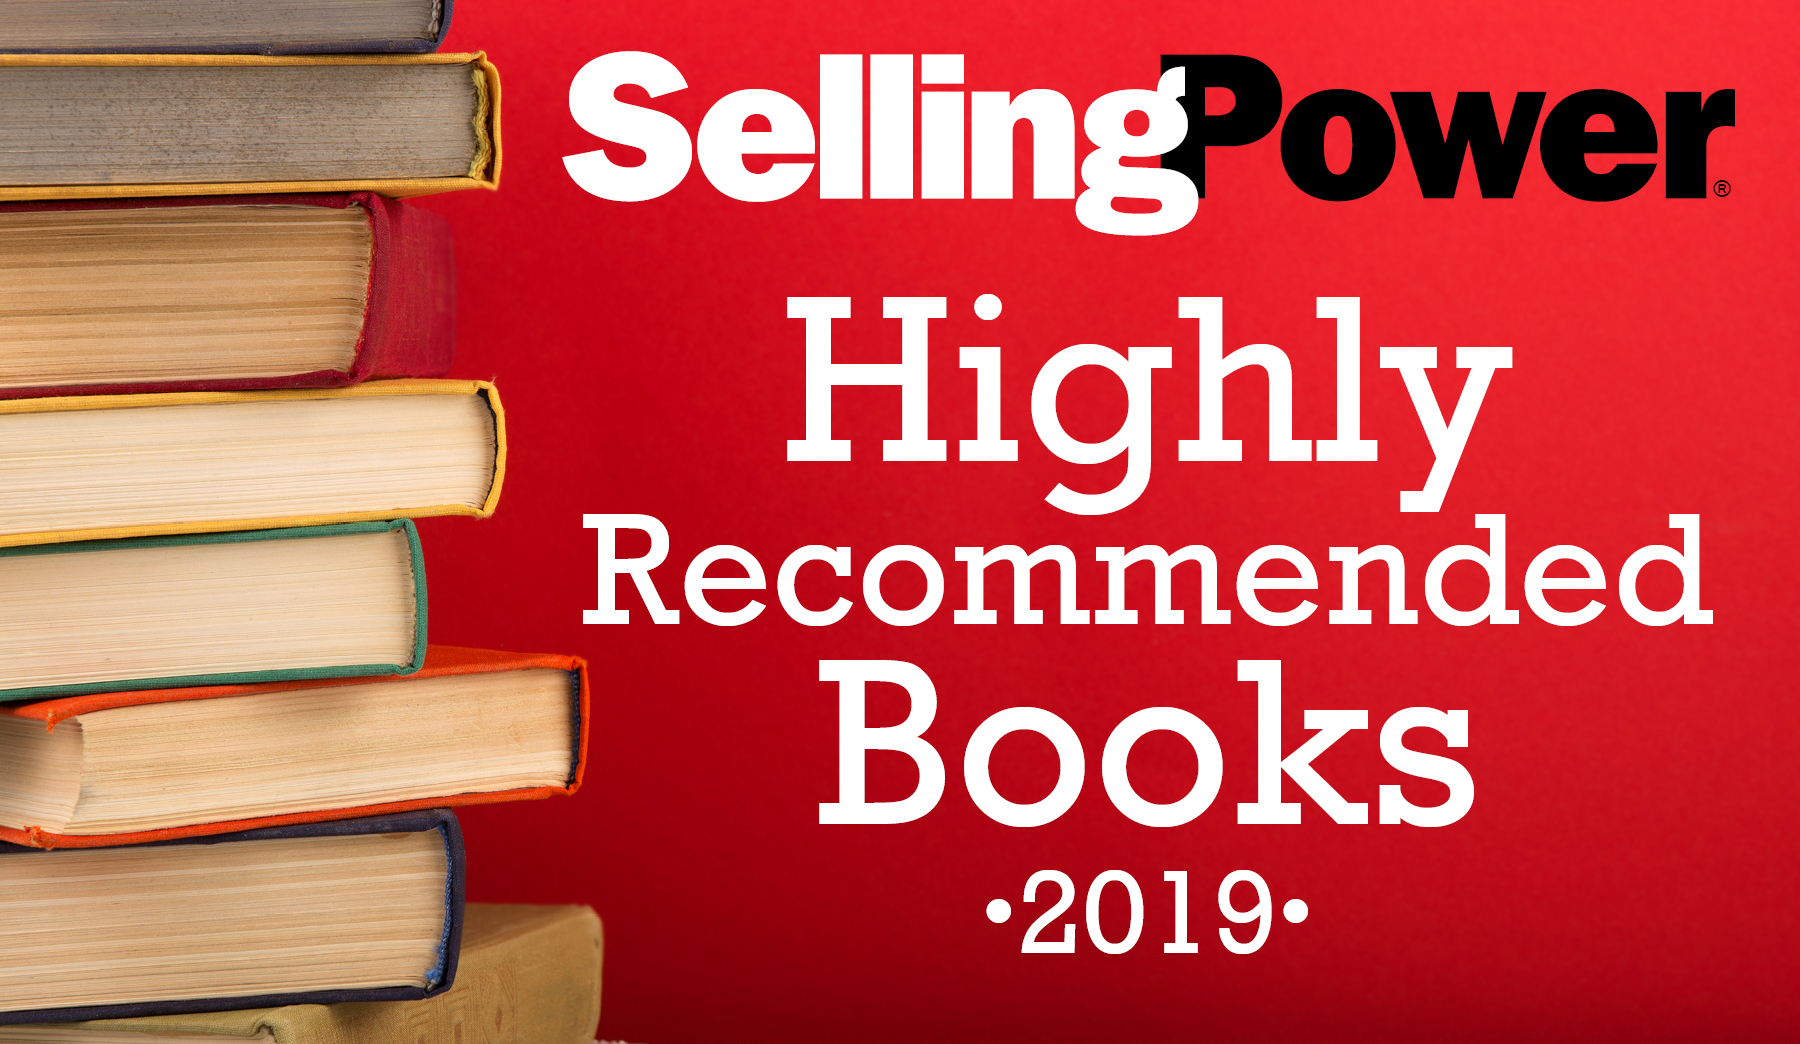 Logo for the Selling Power Highly Recommended Books 2019